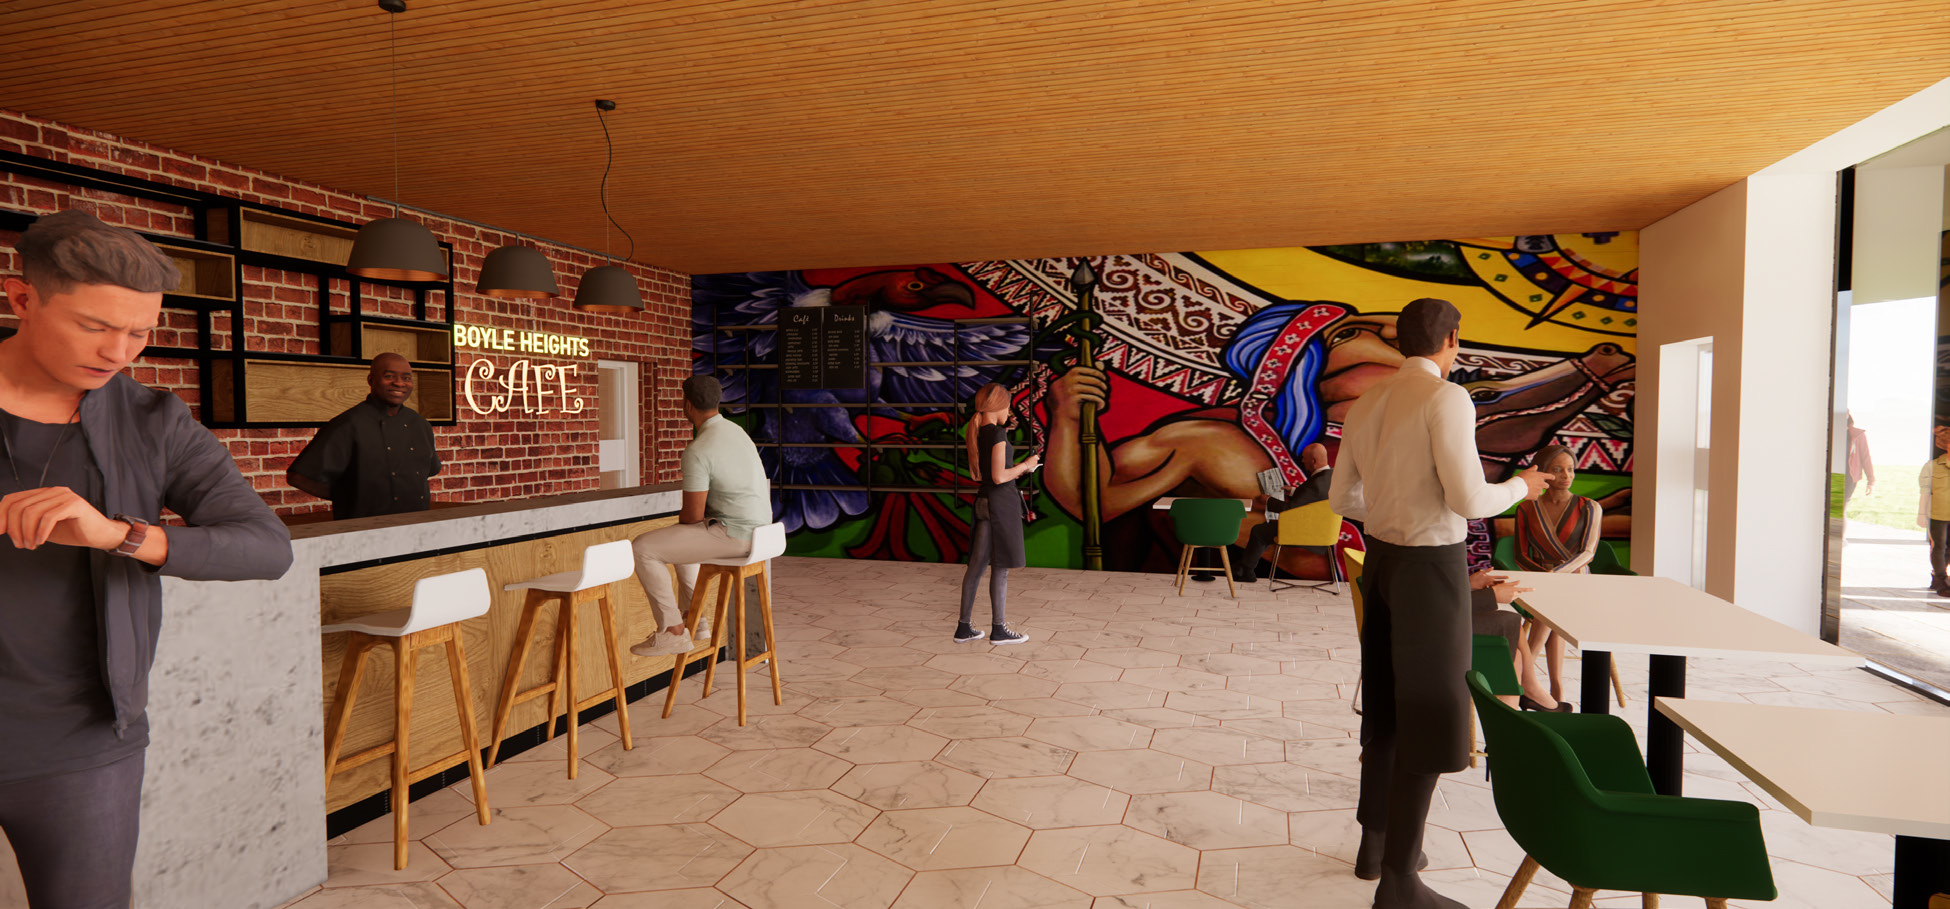 cafe lobby with customers and mural on back wall